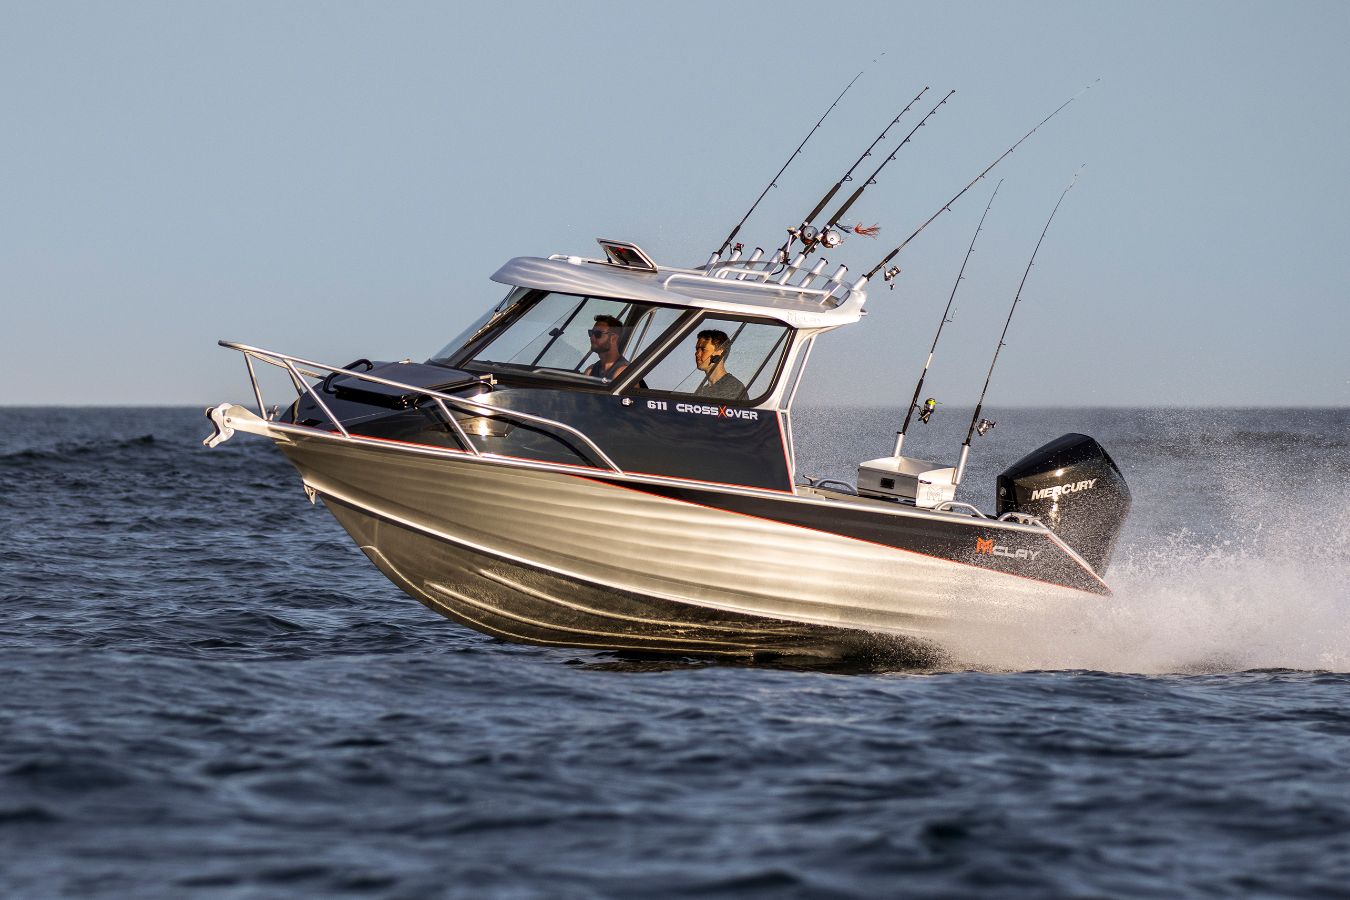 McLay 611 CrossXover Hardtop (Base Packages From $96,398.00) - Fish City  Albany : Fishing - Hunting - Boating, North Shore